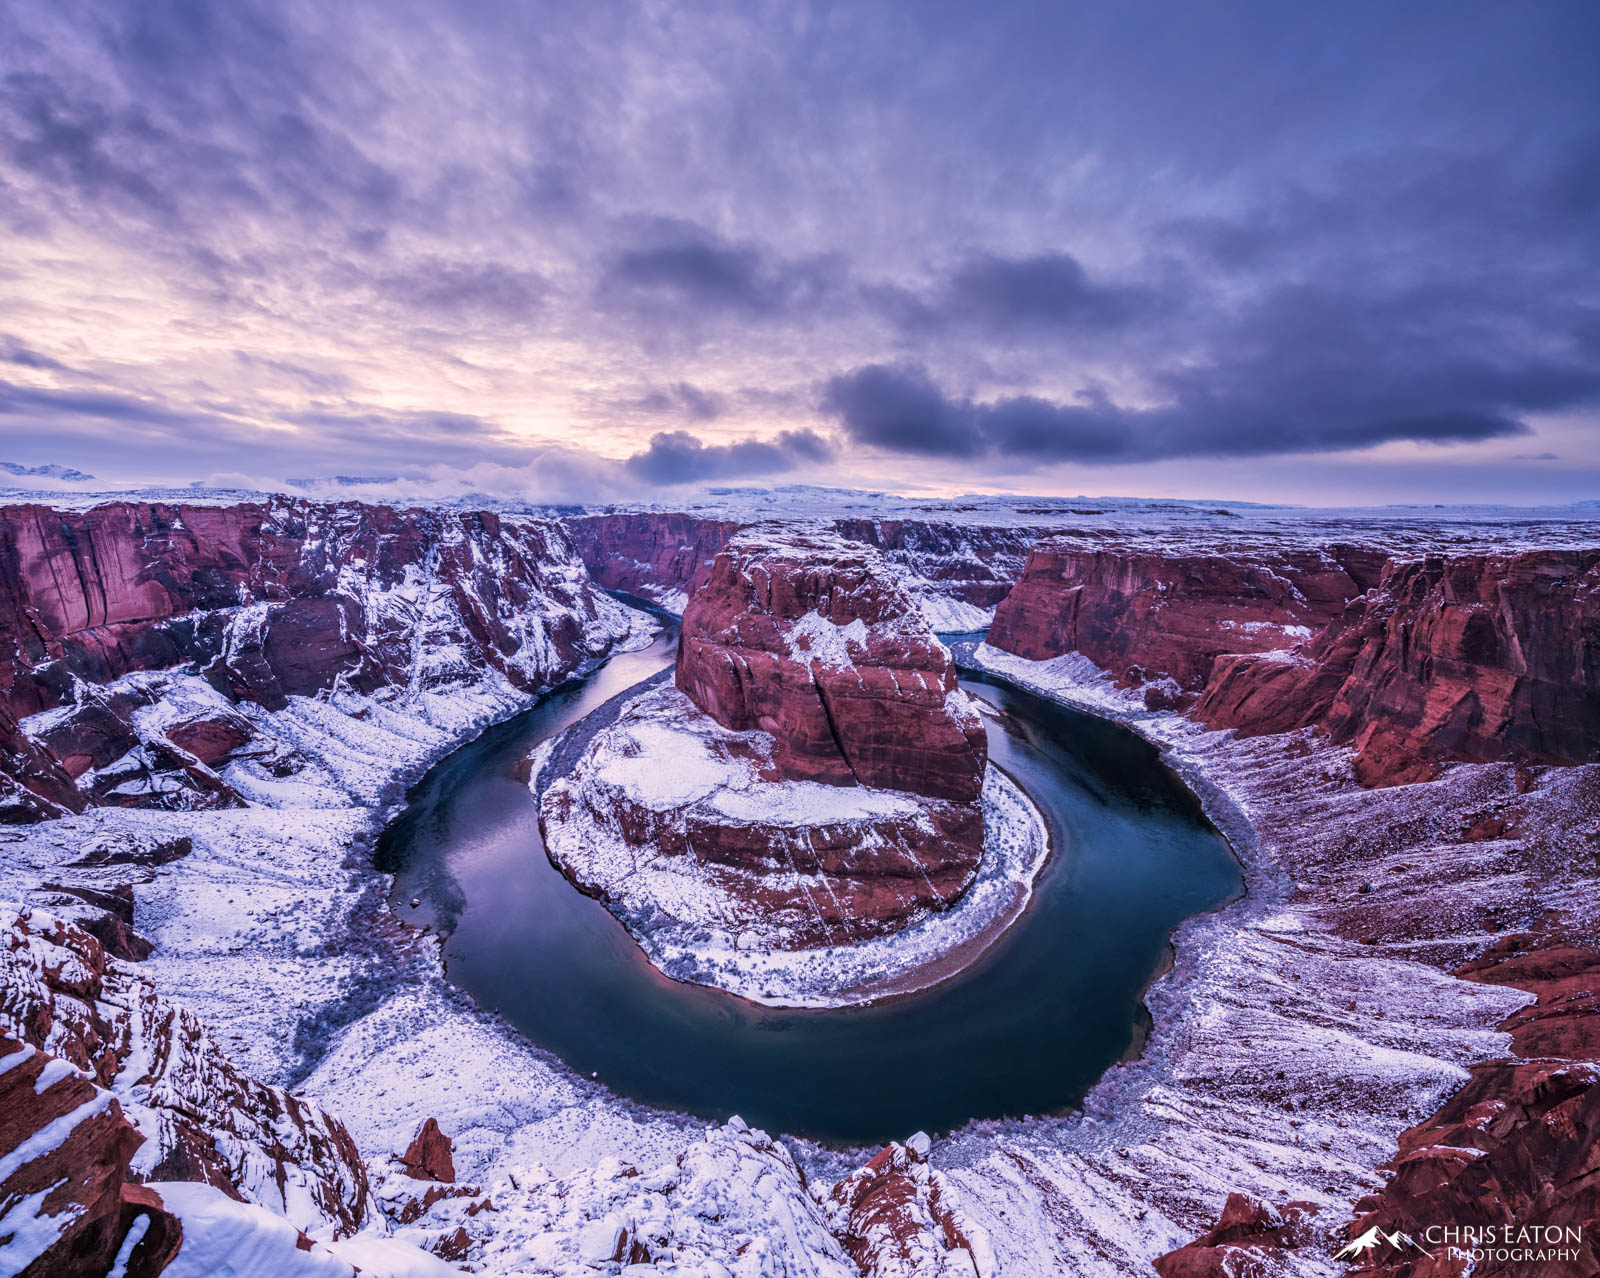 As the storm breaks at sunset, a winter wonderland is revealed in Glen Canyon National Recreation Area at Horseshoe Bend. The...